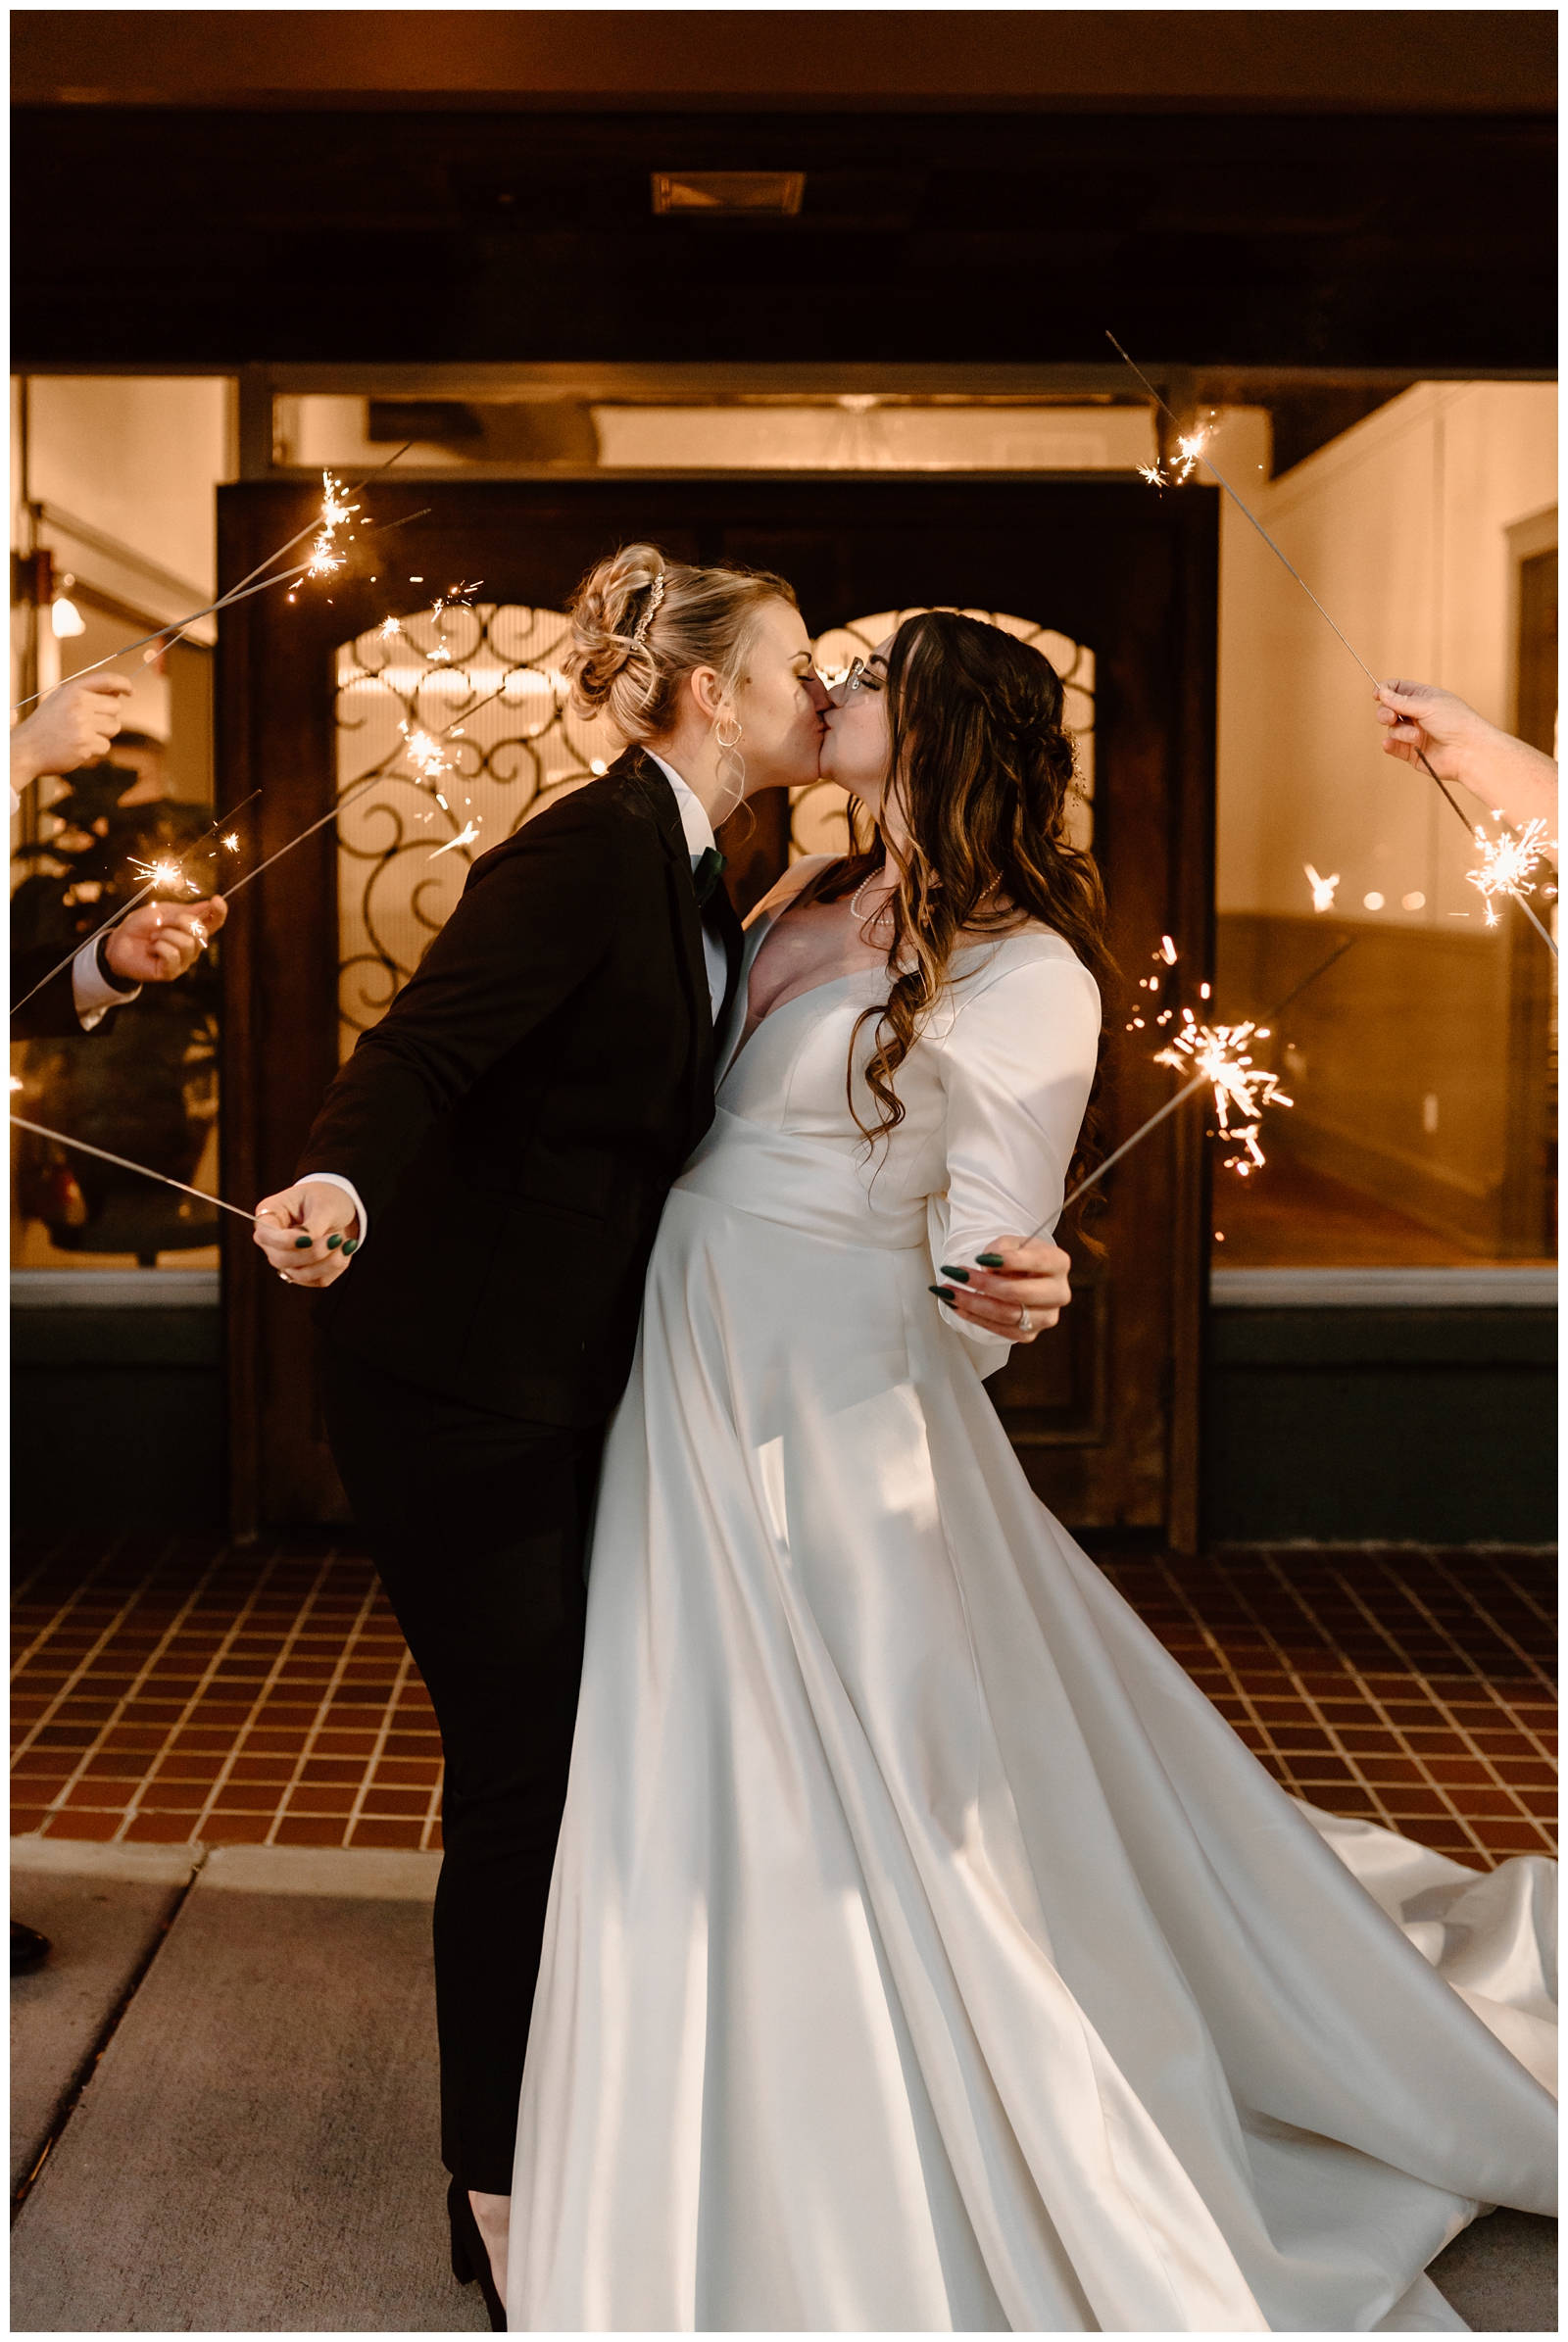 Sparkler Send-Off at intimate and cozy winter elopement at Bakery 1818 by Greensboro NC photographer